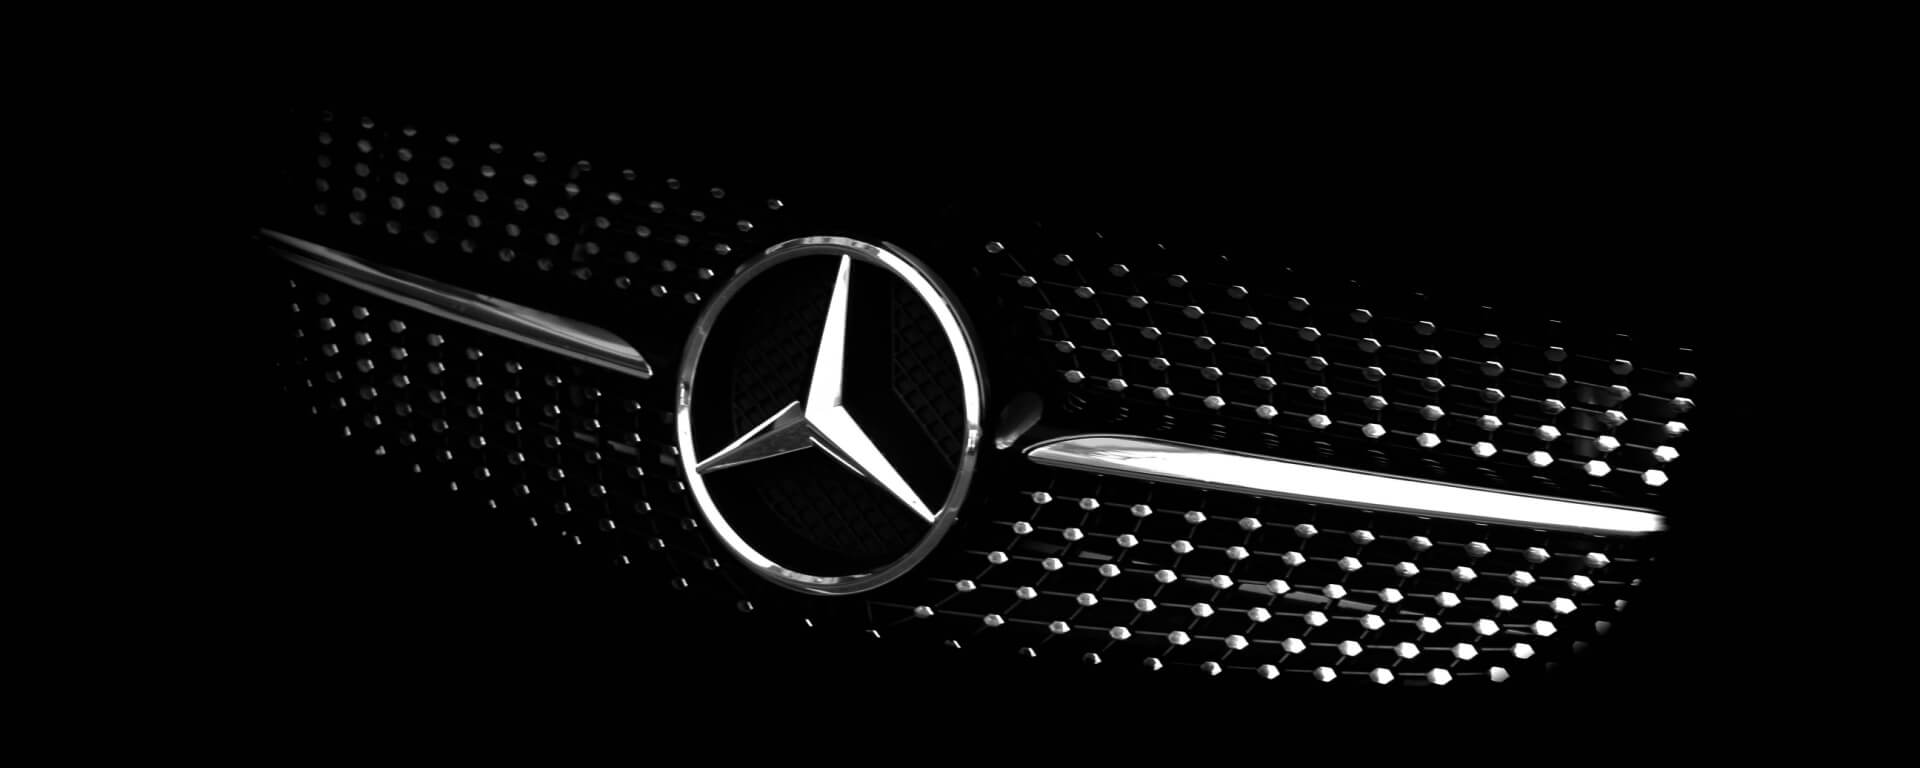 Close up image of the grill of a black Mercedes Benz